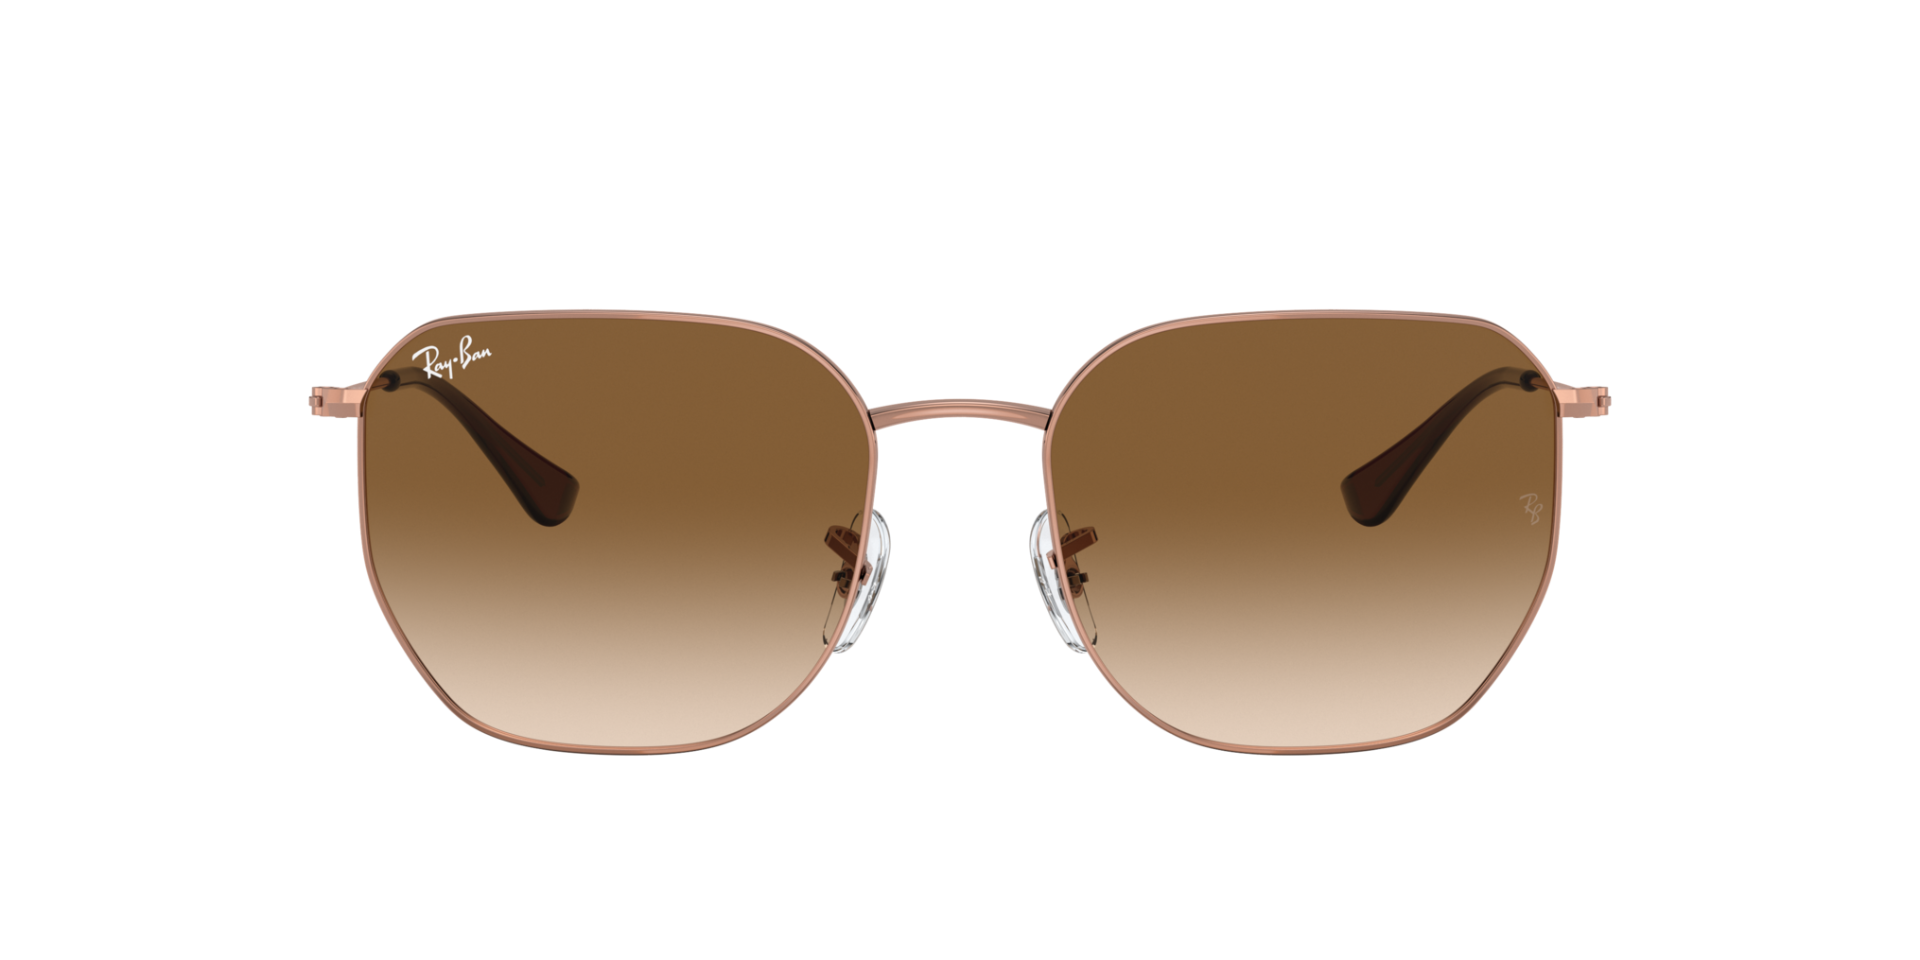 Buy Ray-Ban Casual Classic Sunglasses Online.